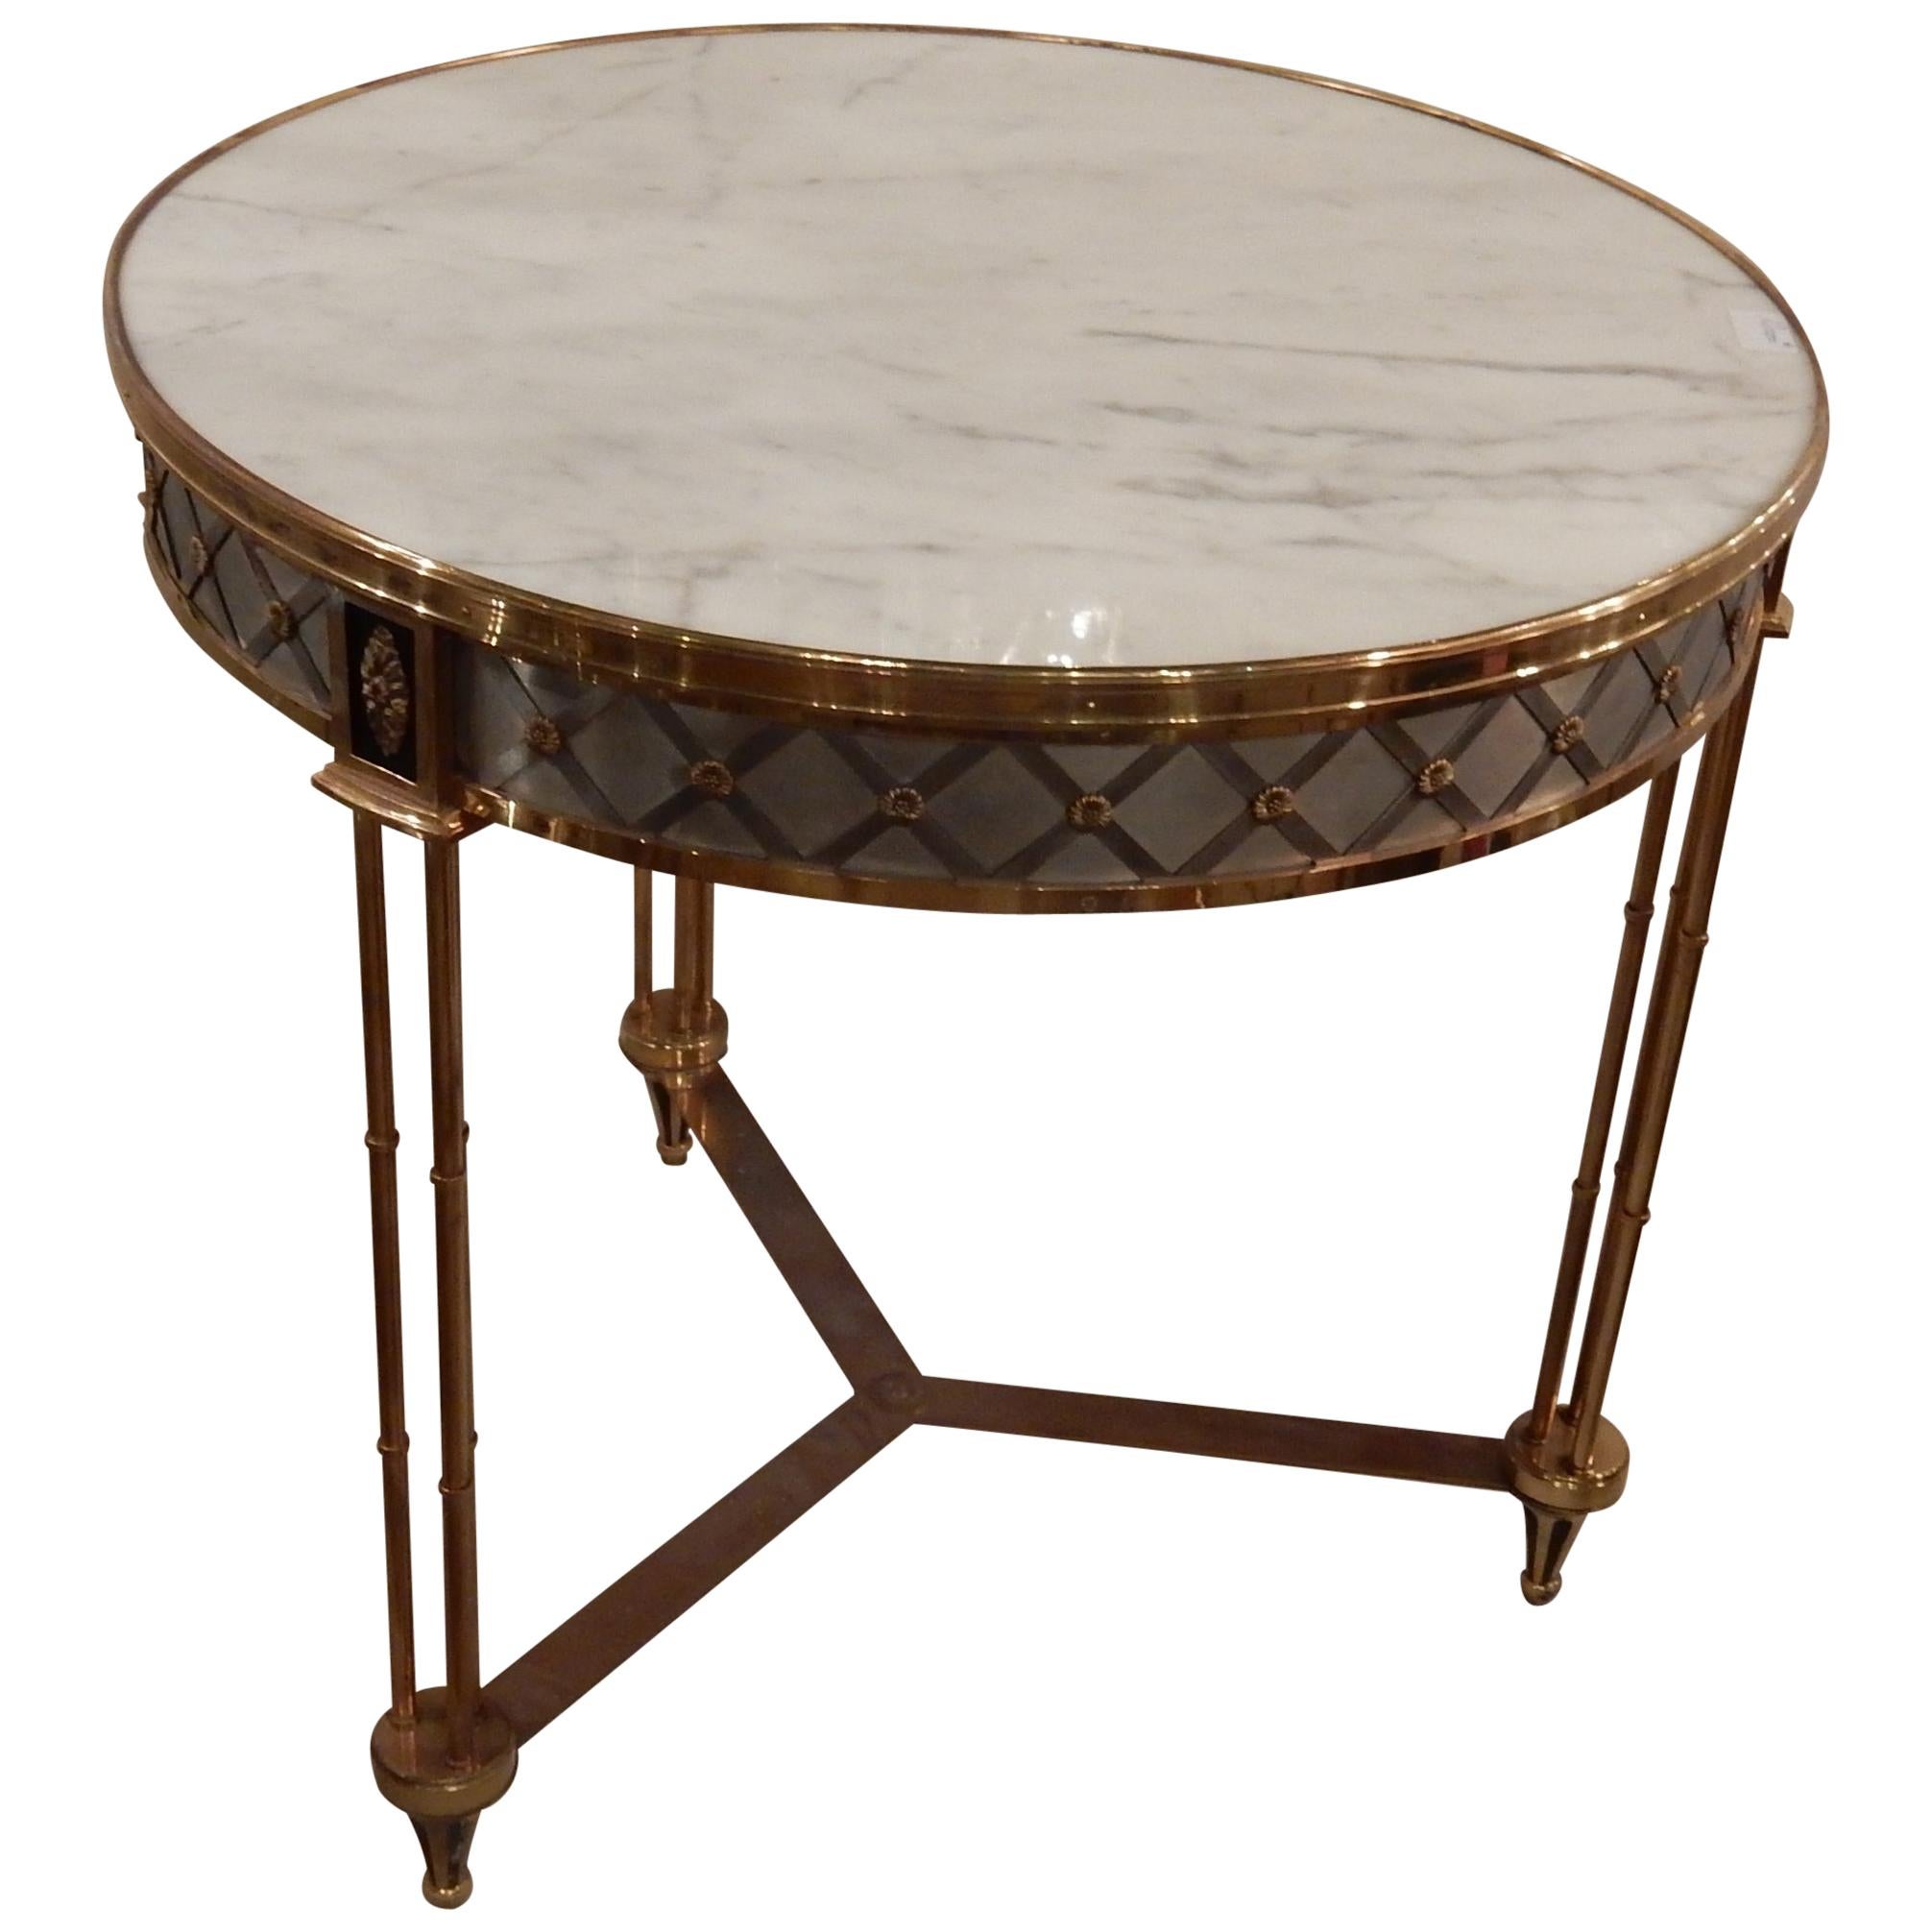 Pedestal Table attributed to Maison Jansen in the Style of Adam Weisweiler